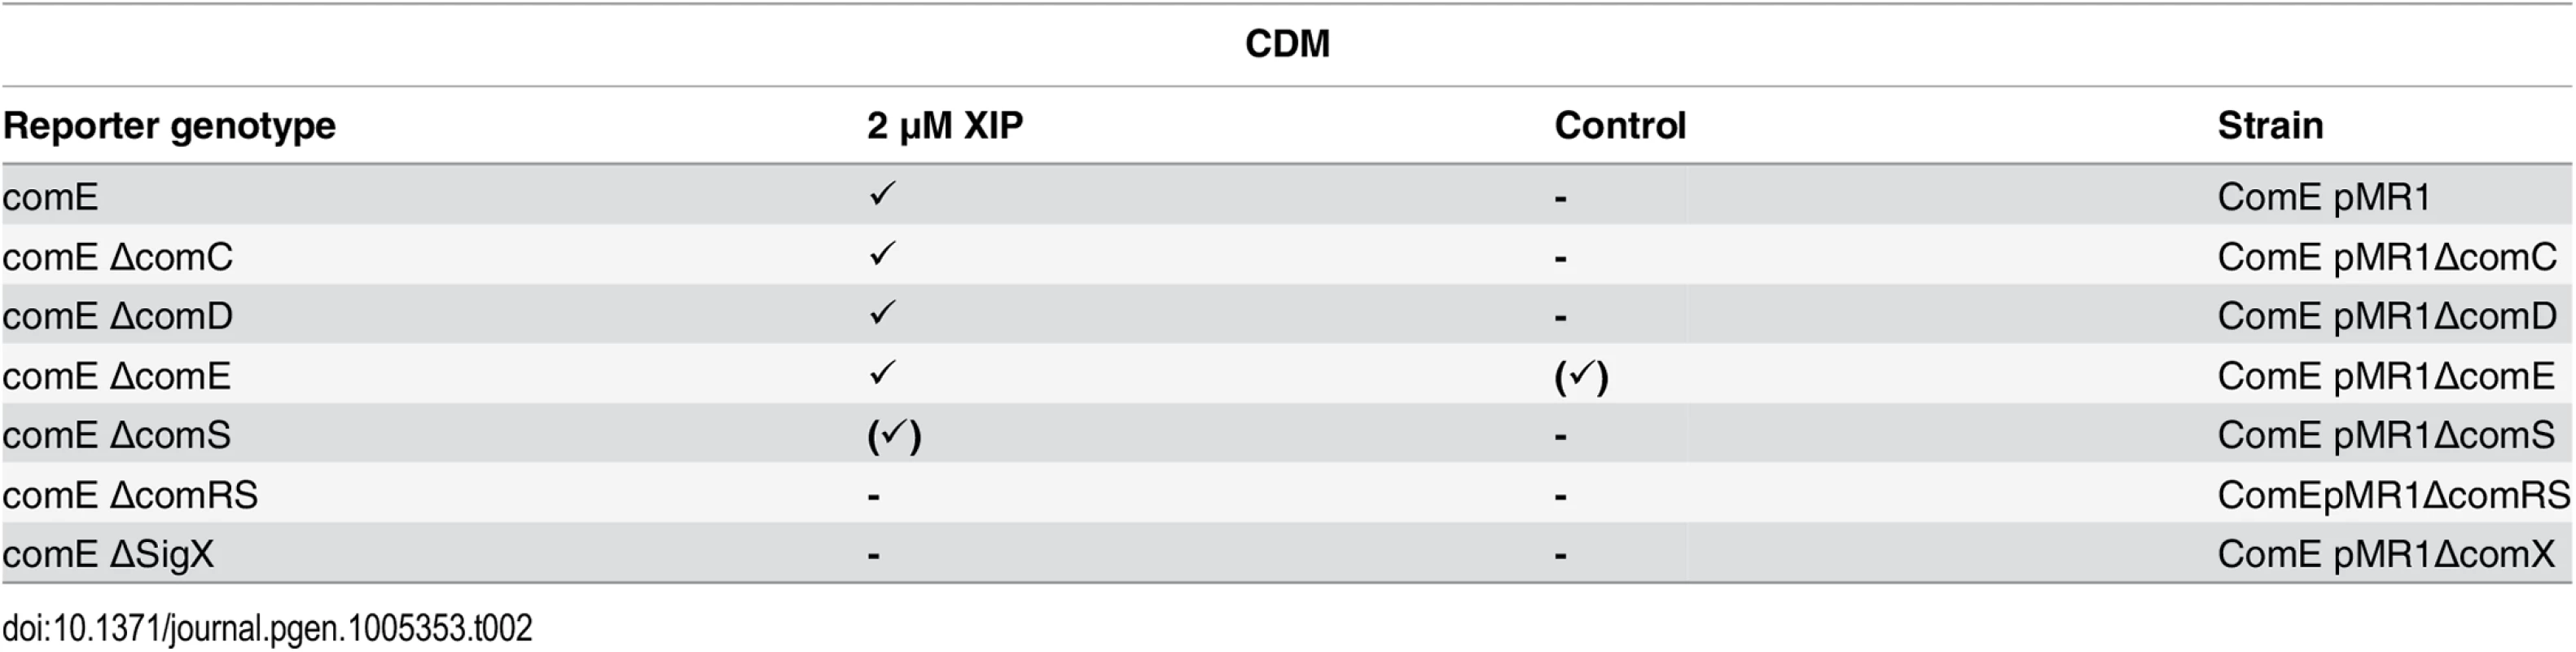 Expression of <i>comE</i> in different gene deletion background in CDM under XIP induced conditions.